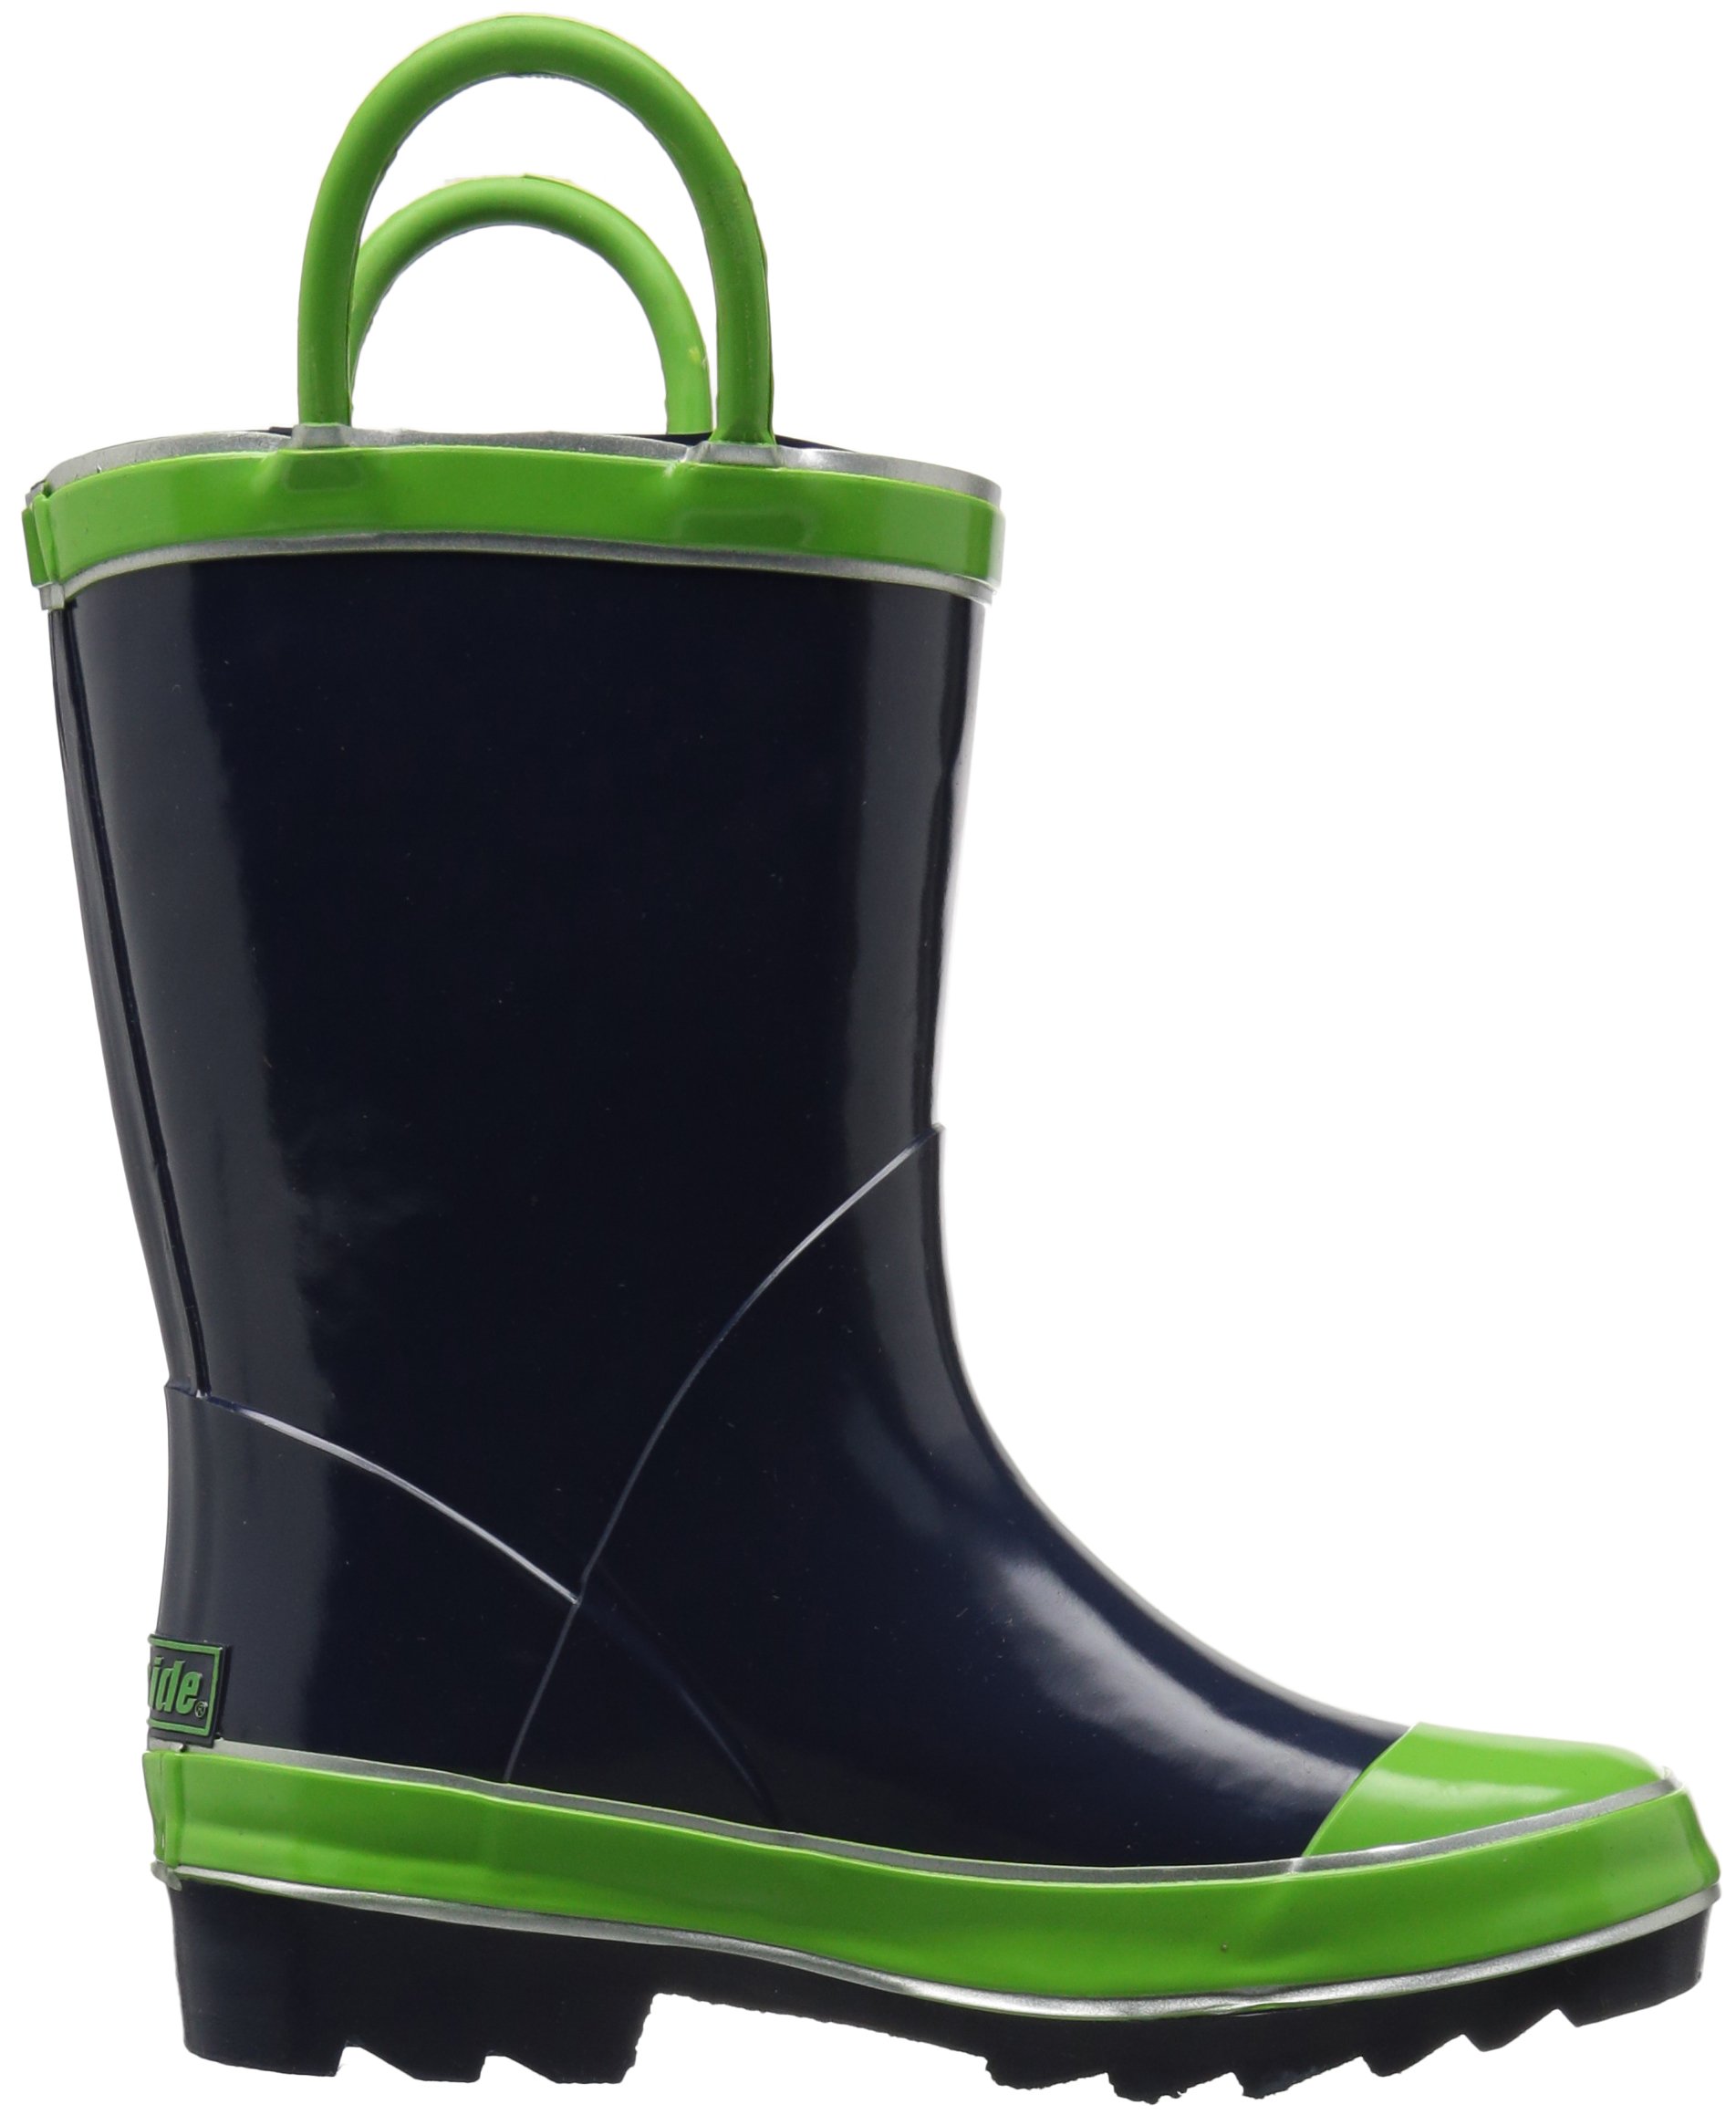 Northside Baby Classic Rain Boot, Navy/Green, 10 M US Toddler